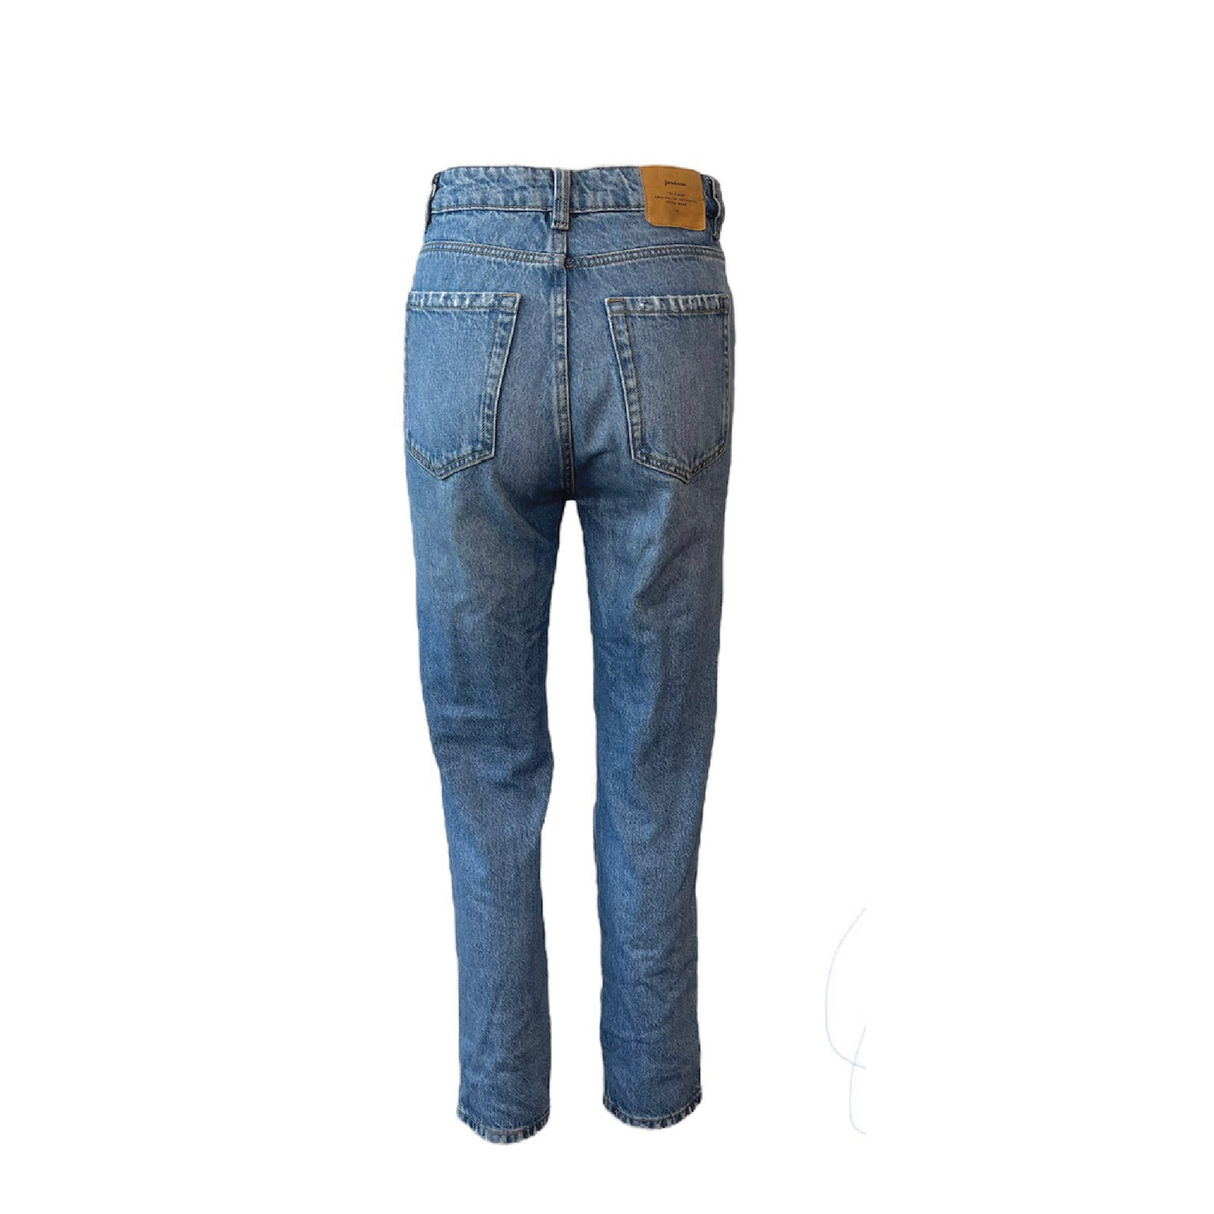 A Second chance - Stradivarius Denim Pant 34 Women - Delivery All Over Lebanon